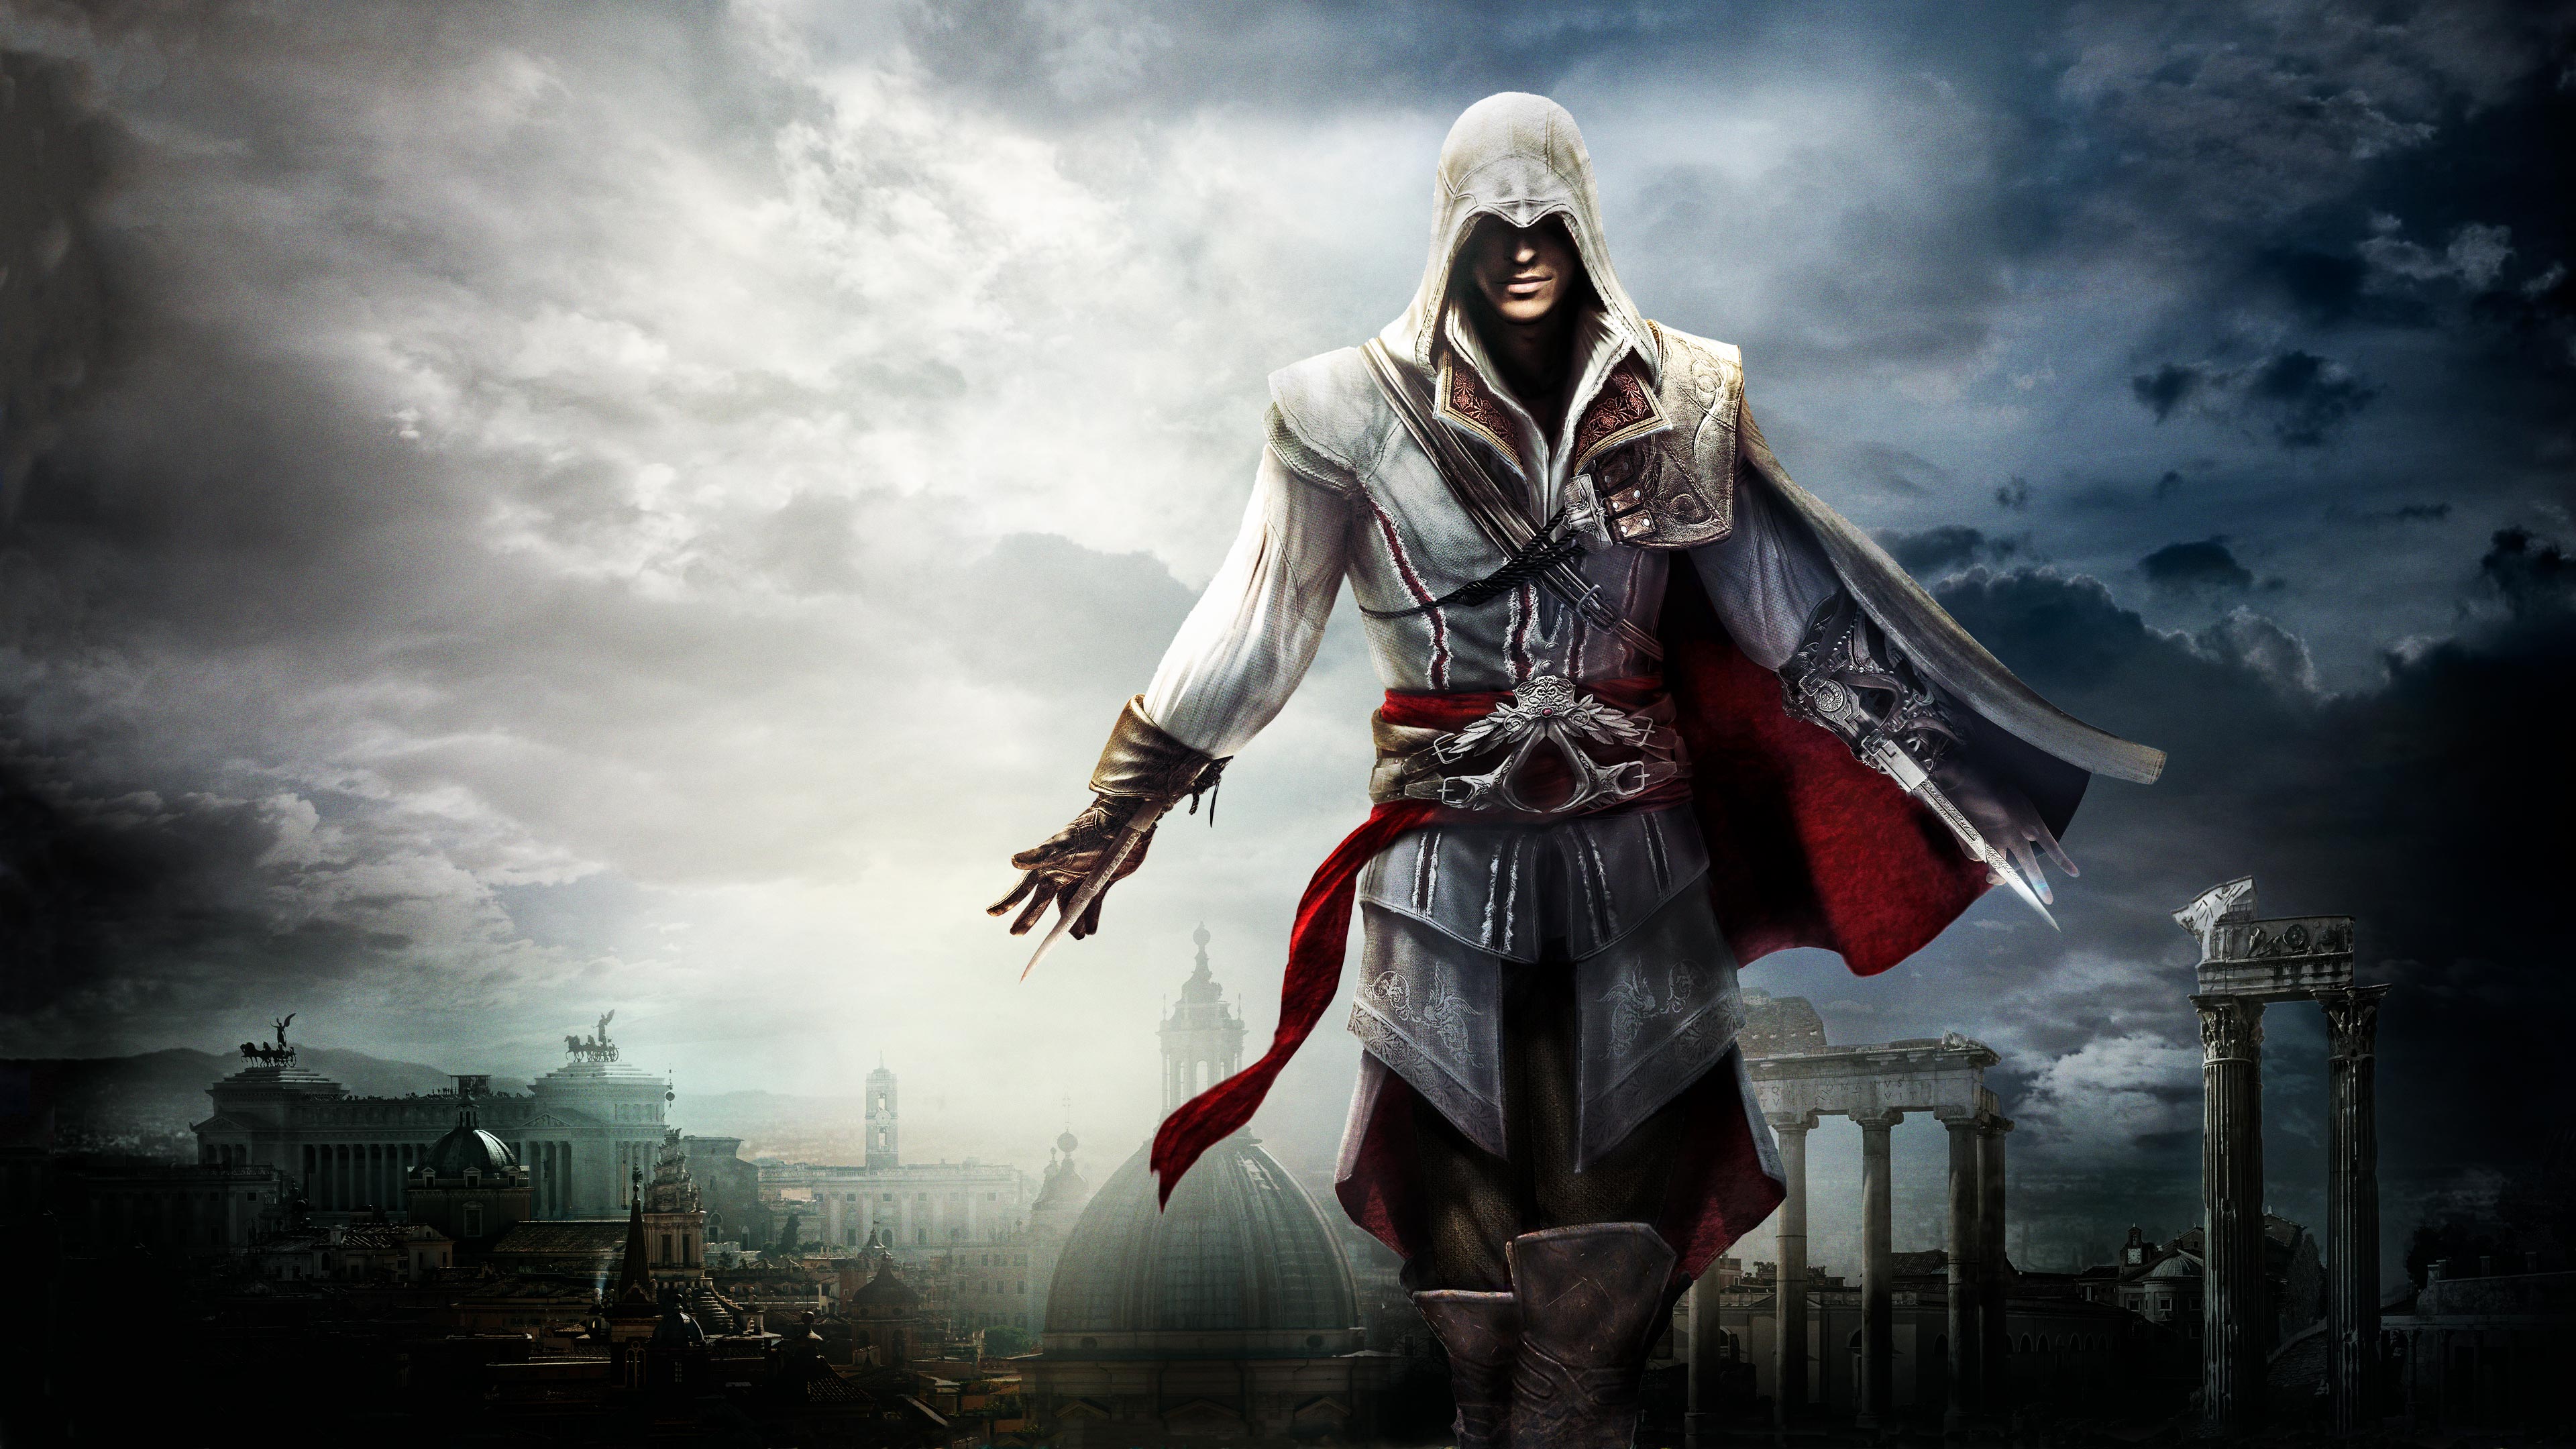 Assassin's Creed, Official Trailer 2 [HD]